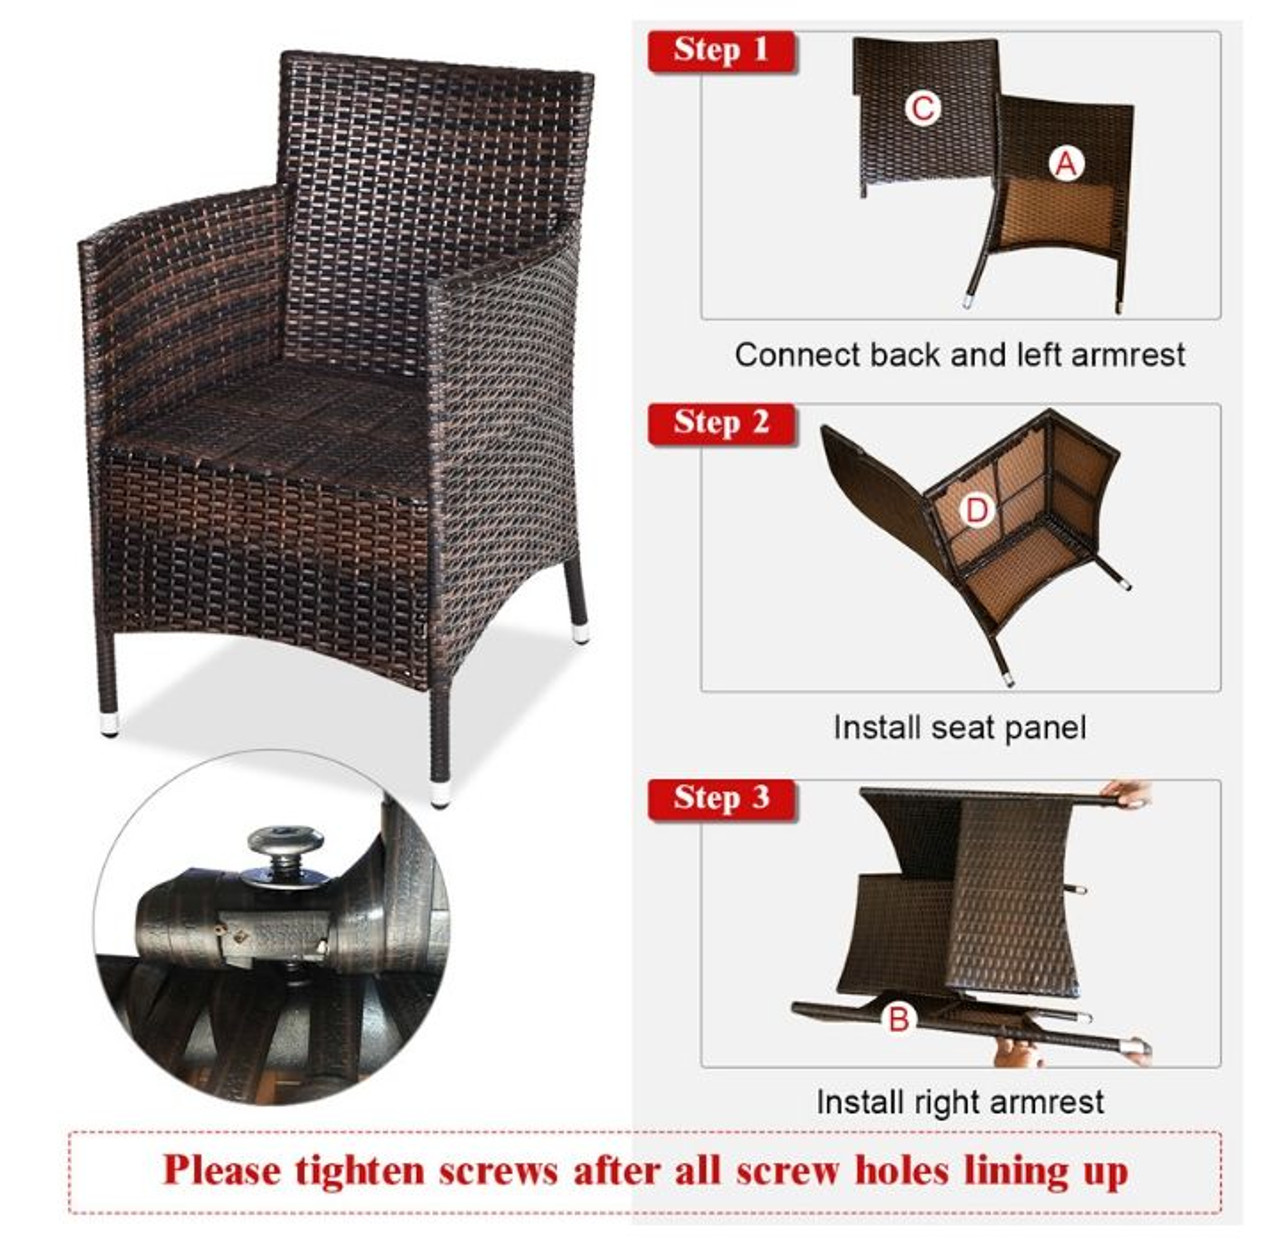 Rattan Wicker Outdoor 3-Piece Table and Chair Set product image